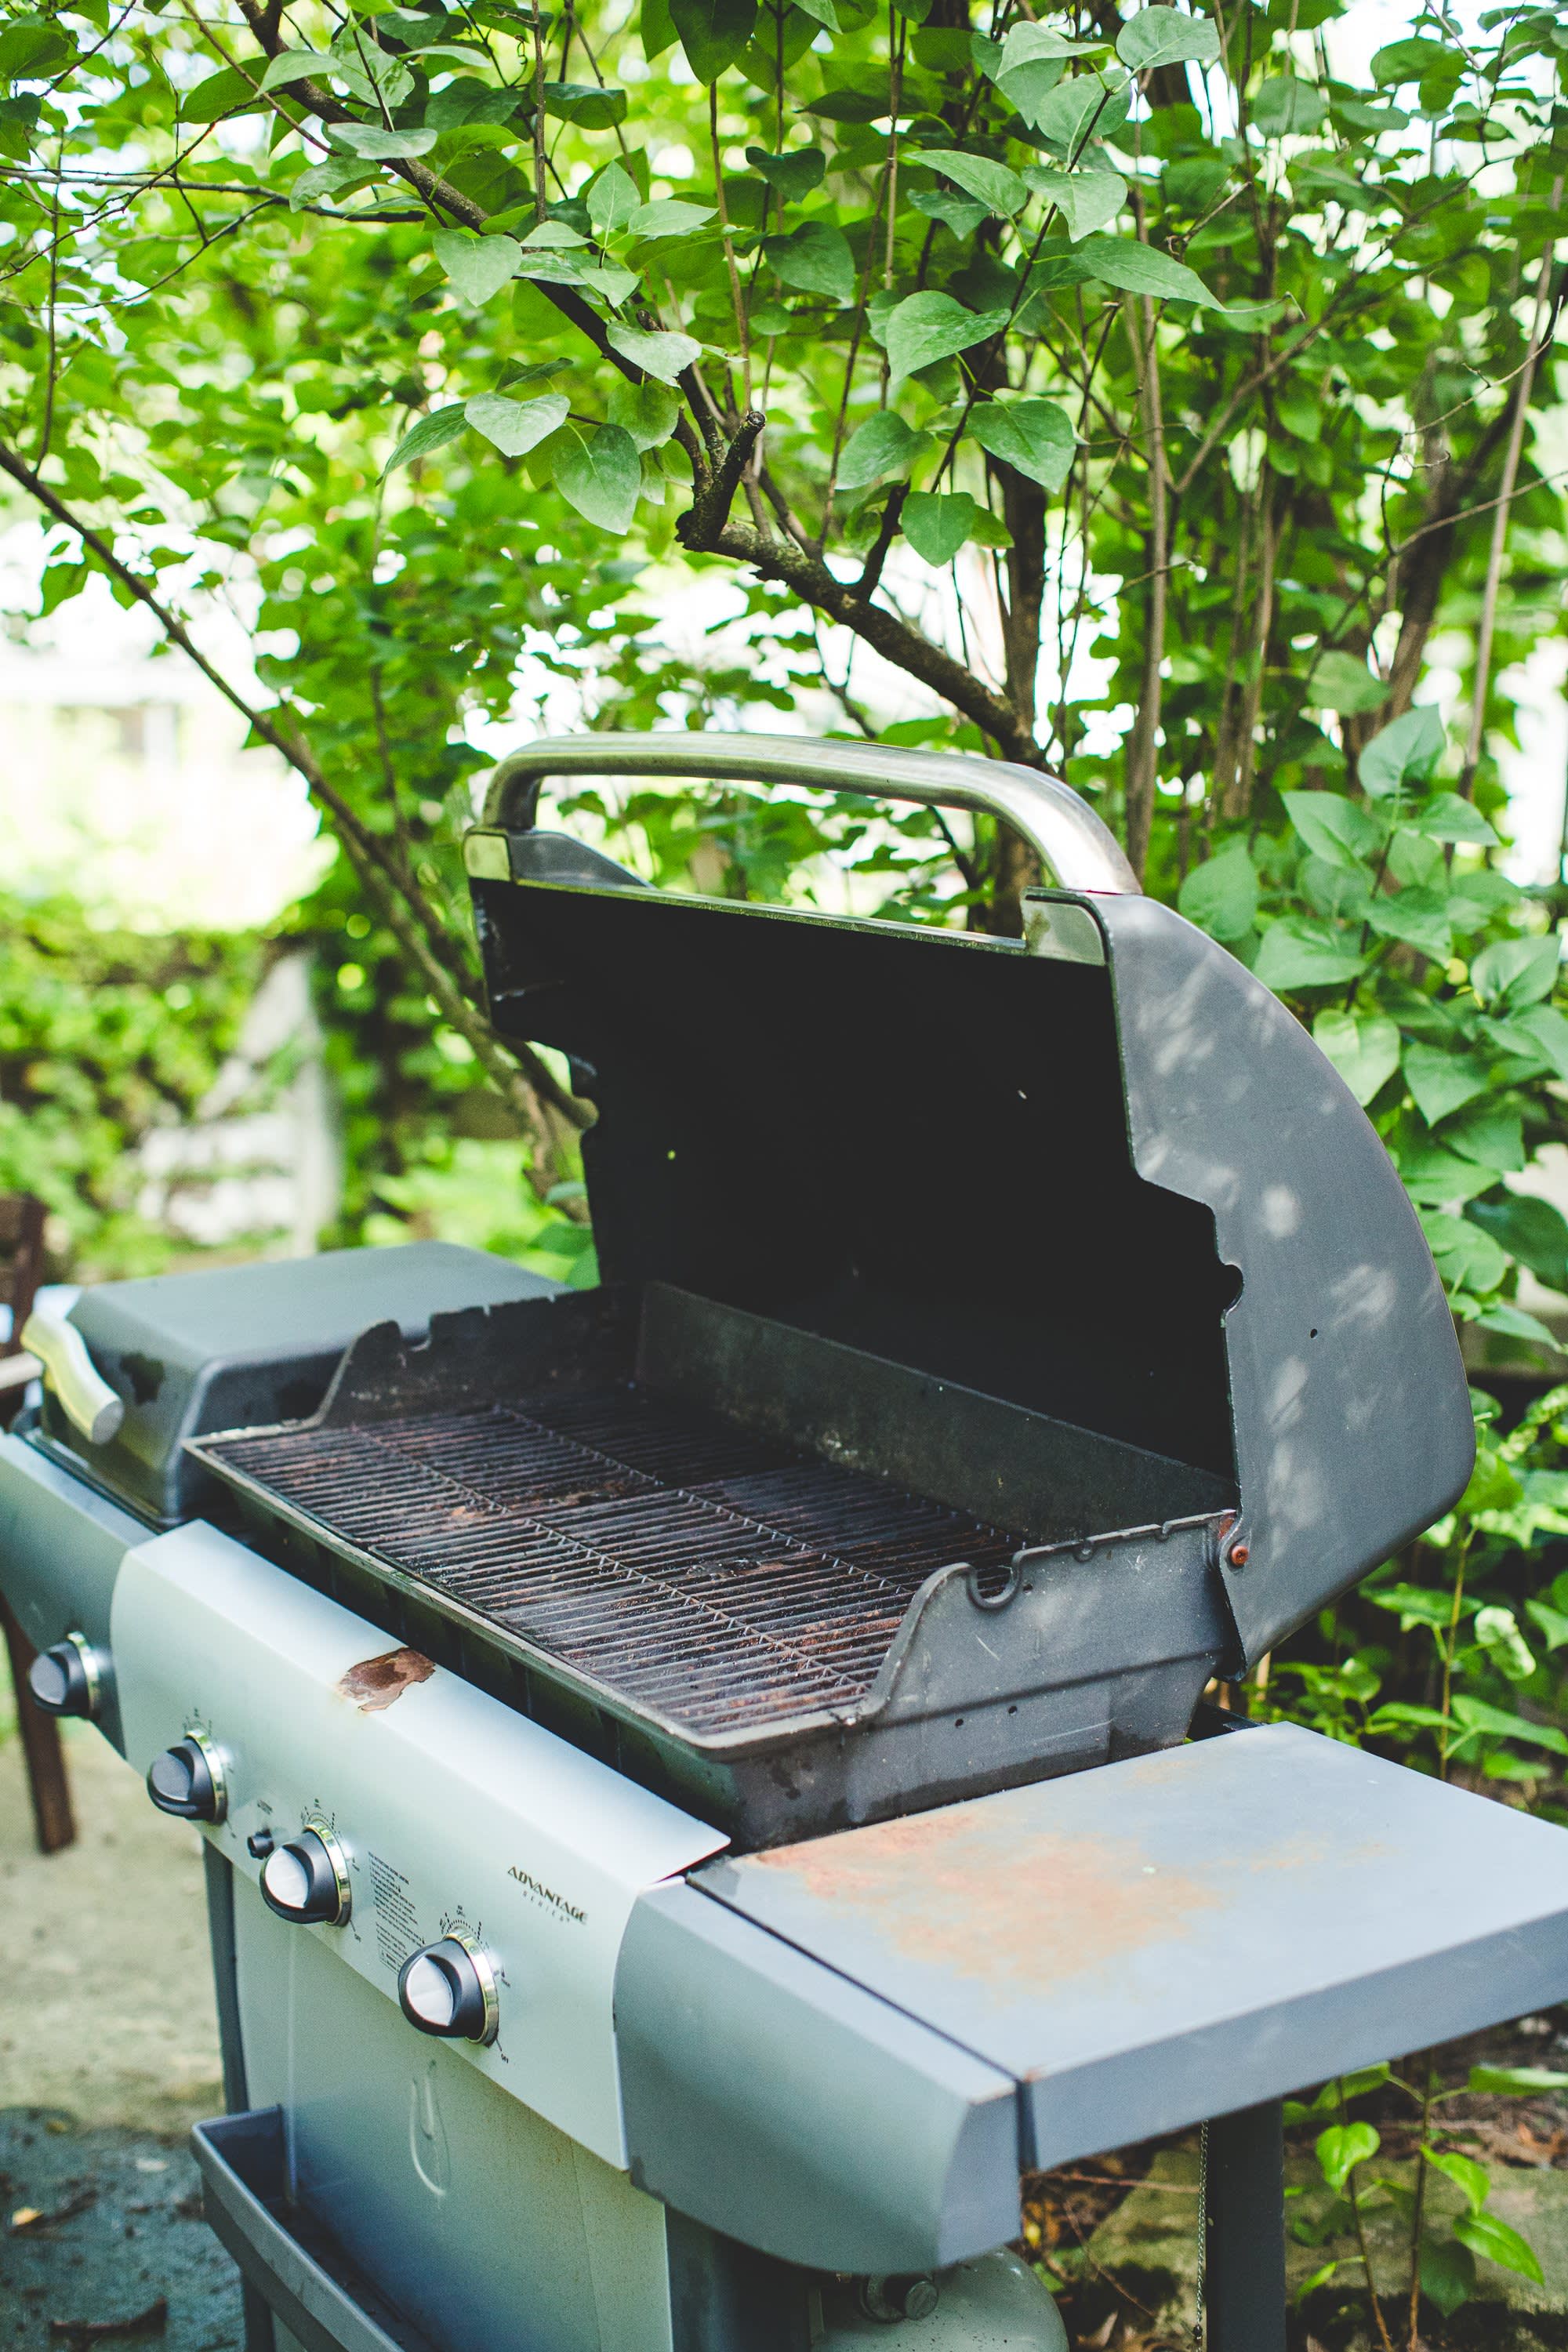 How To Clean Grill Outside How To Clean a Gas Grill, Start to Finish | Kitchn